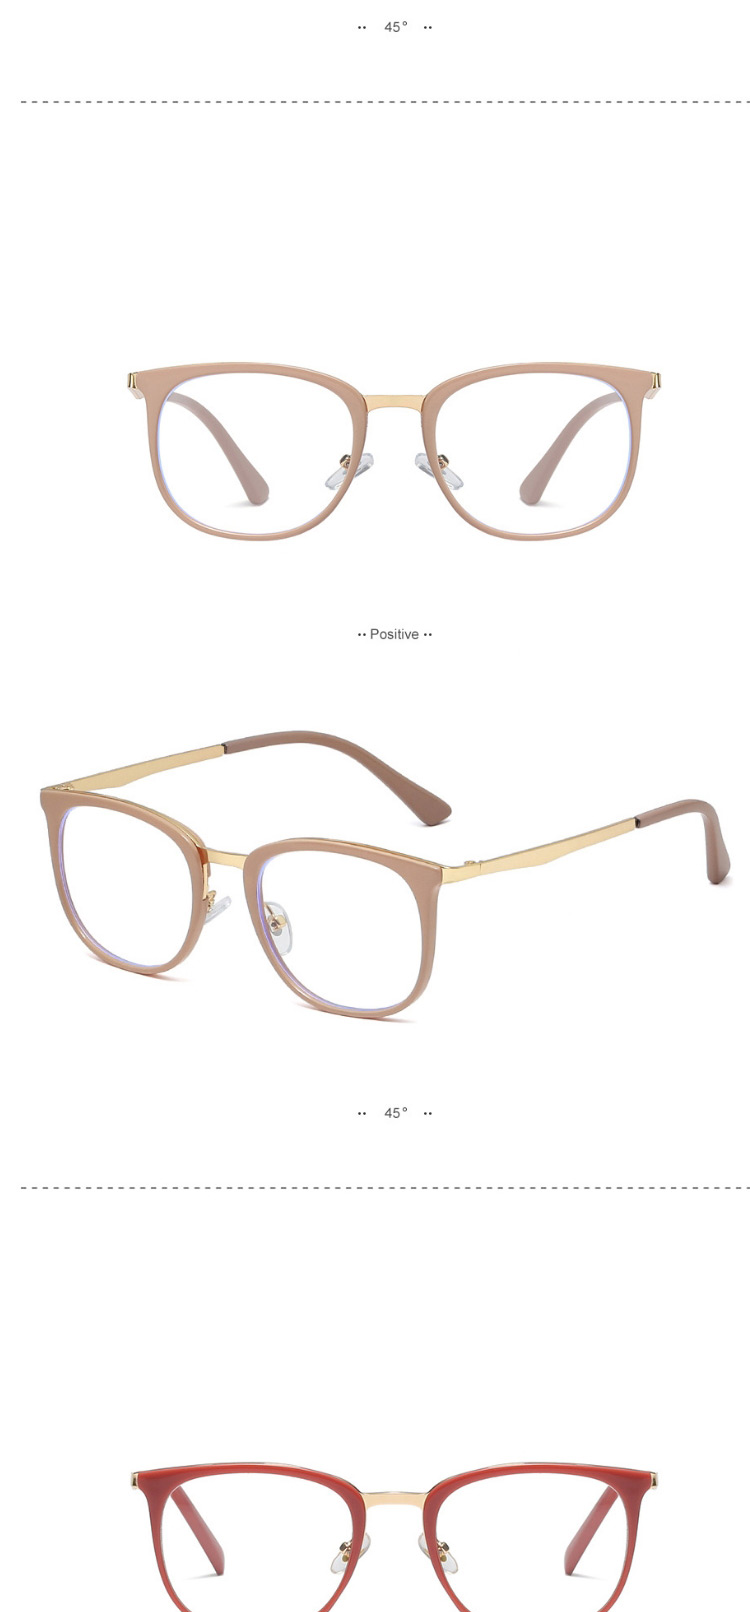 Fashion C5 White/transparent Ultra-light Can Be Equipped With Myopia Round Frame,Fashion Glasses